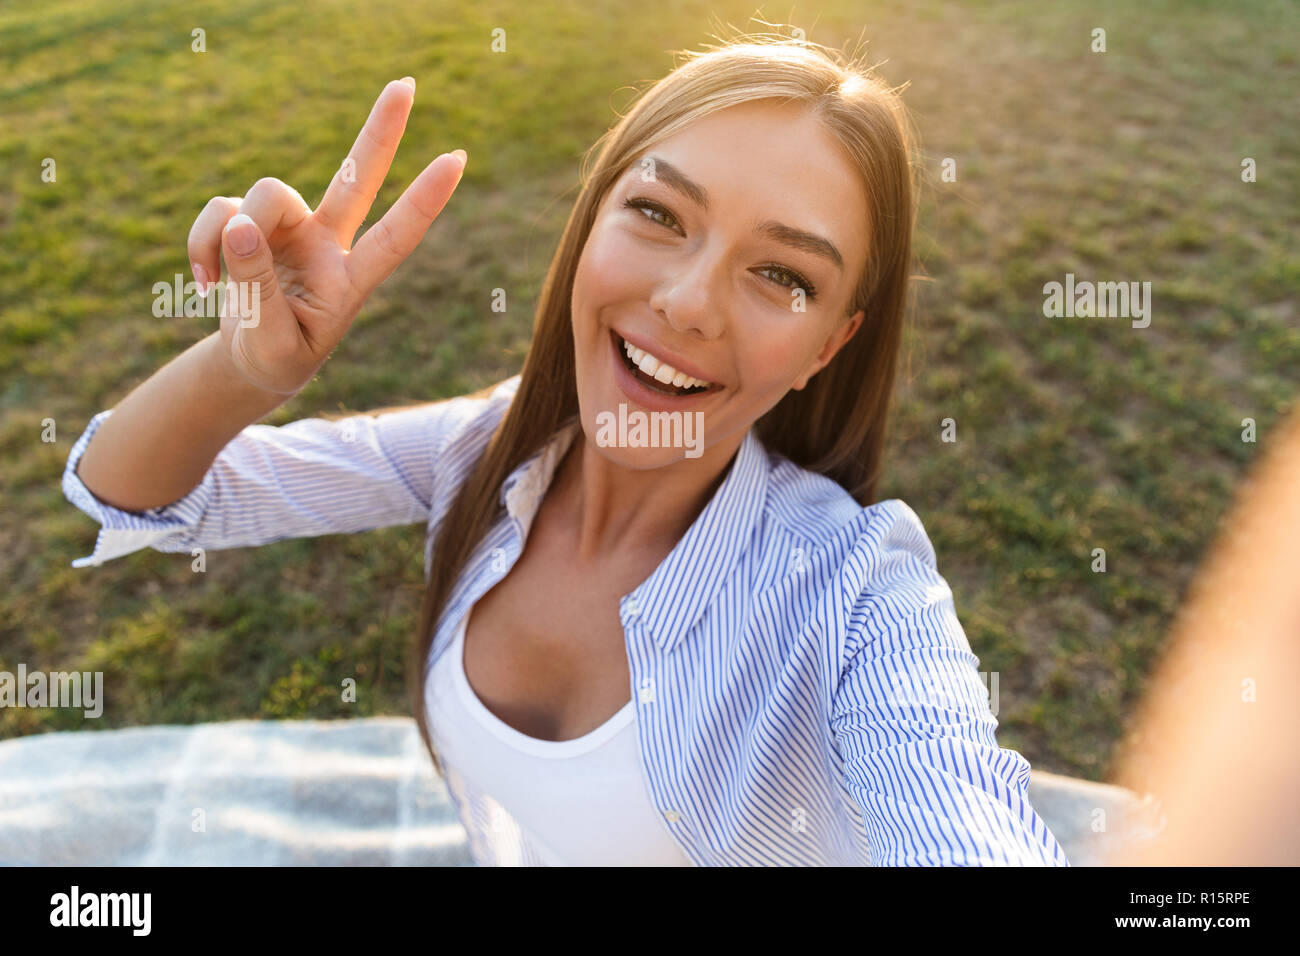 Close up of a cheerful young woman taking a selfie at the park with outstretched hand Stock Photo